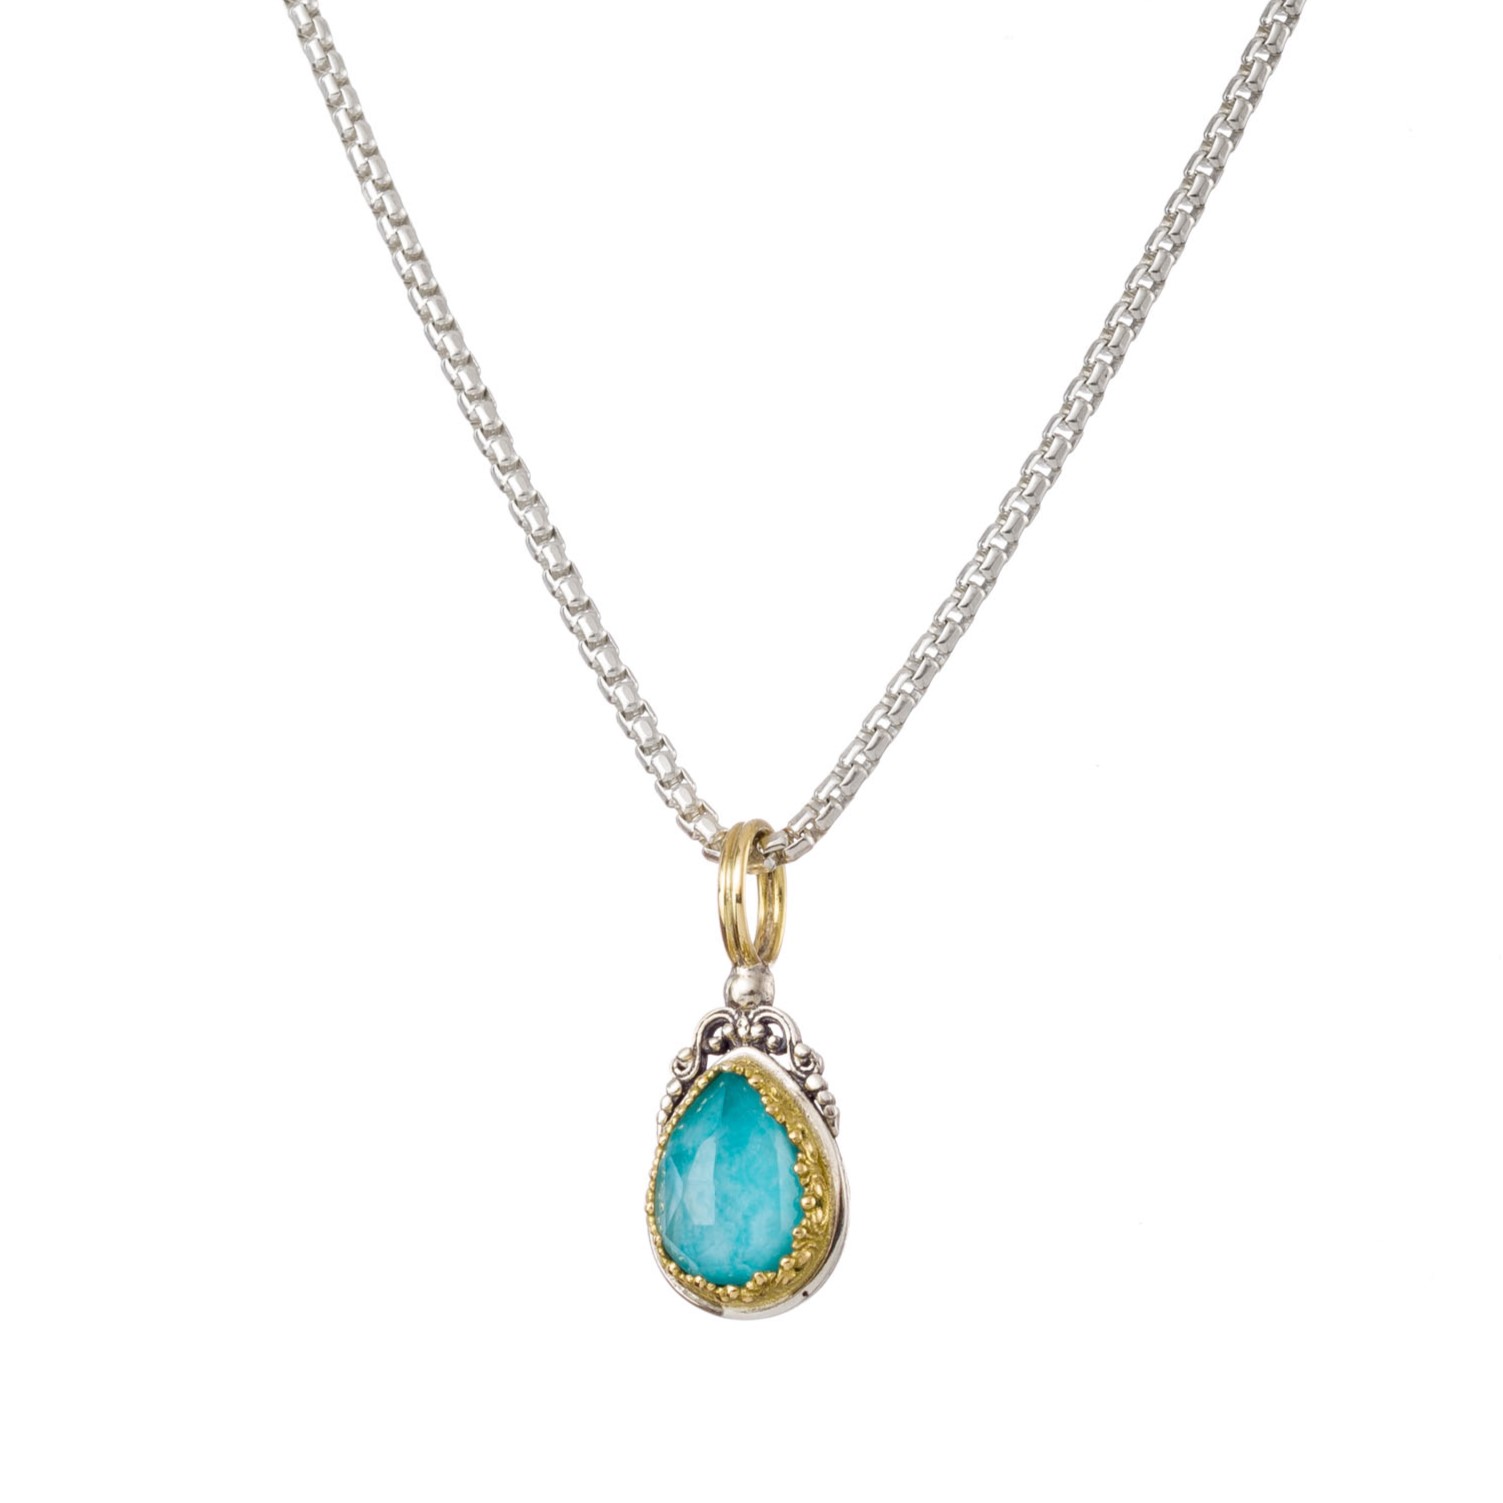 Iris small drop pendant in 18K Gold and Sterling silver with doublet stone